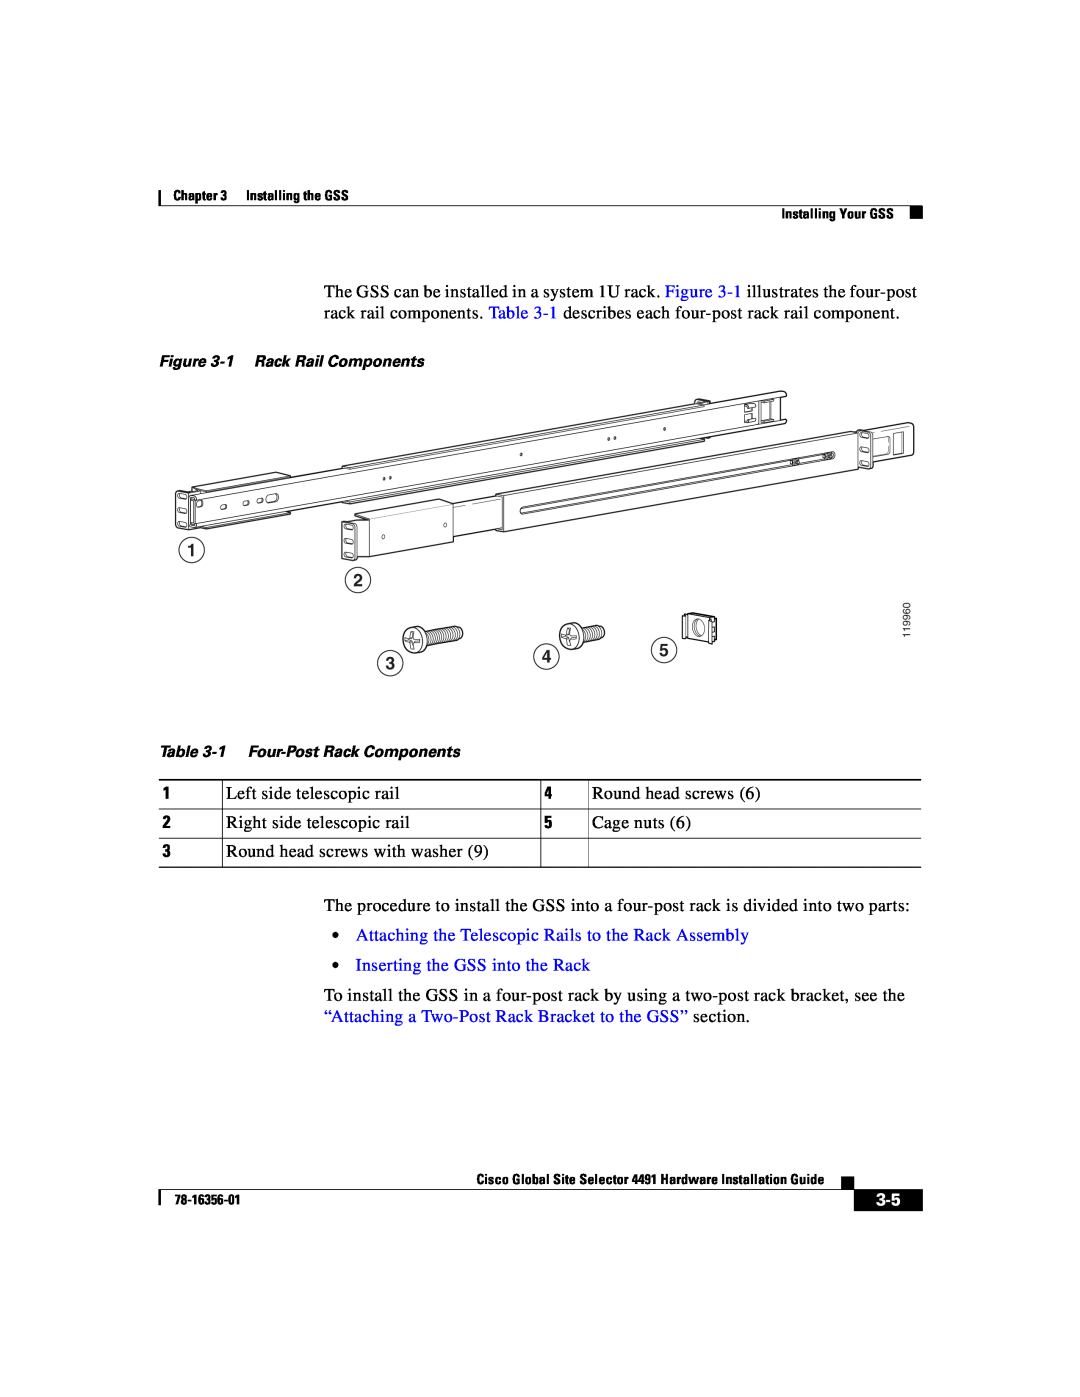 Cisco Systems 78-16356-01 manual Left side telescopic rail, Attaching the Telescopic Rails to the Rack Assembly 